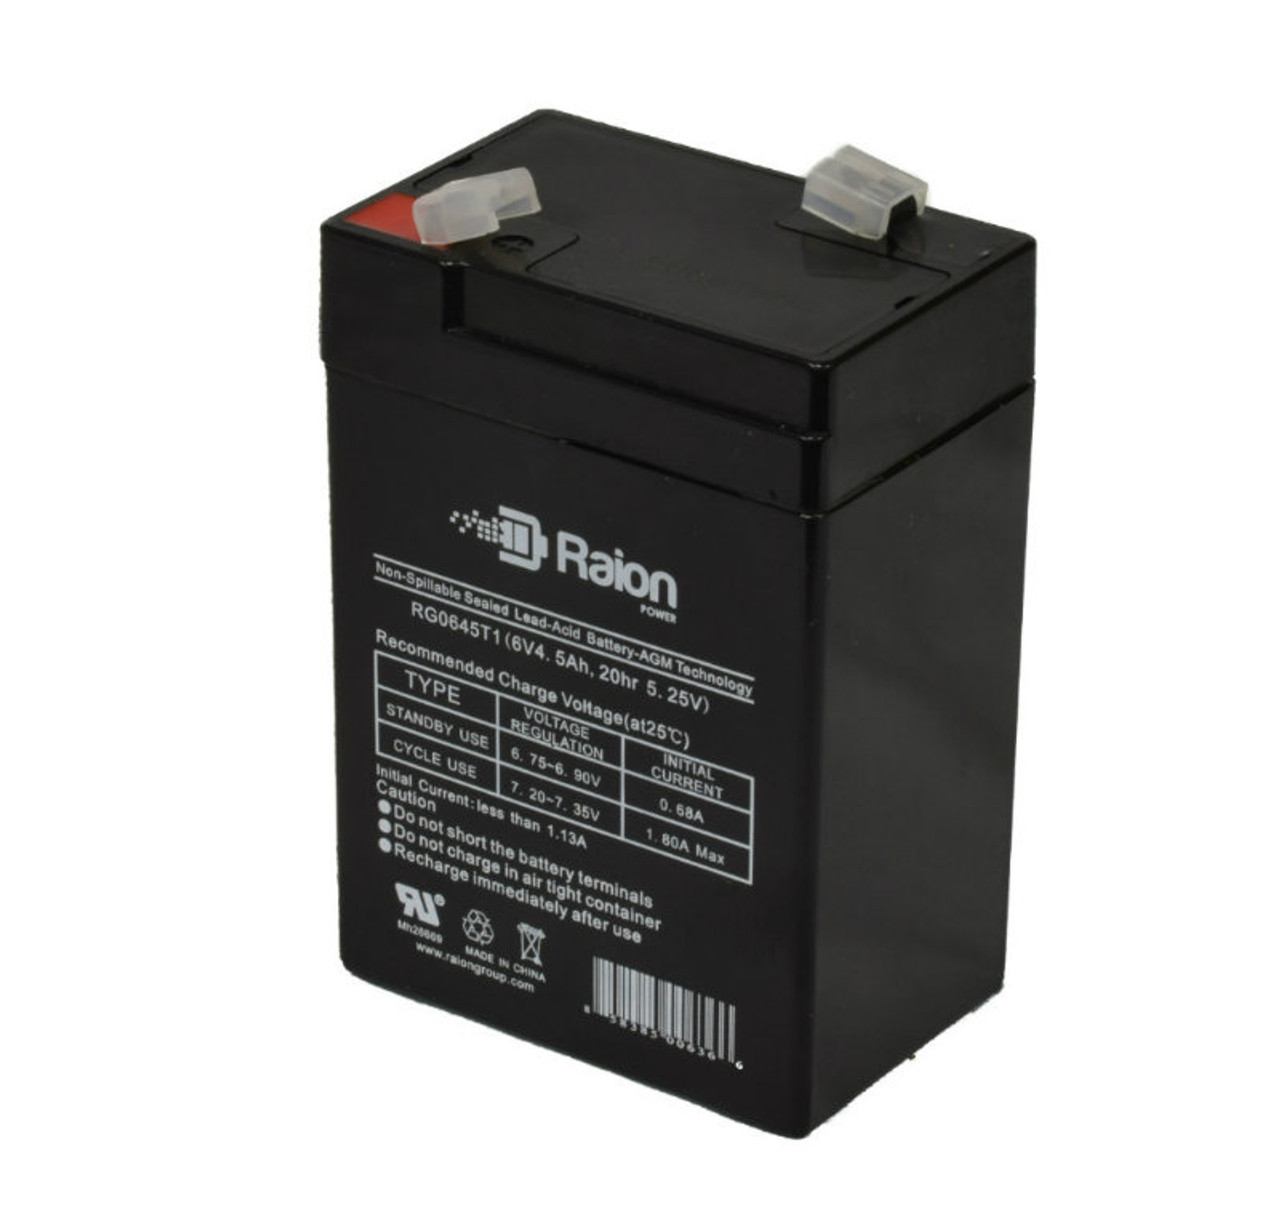 Raion Power RG0645T1 6V 4.5Ah Replacement Battery Cartridge for Costzon 6V Kids Ride On Fire Truck